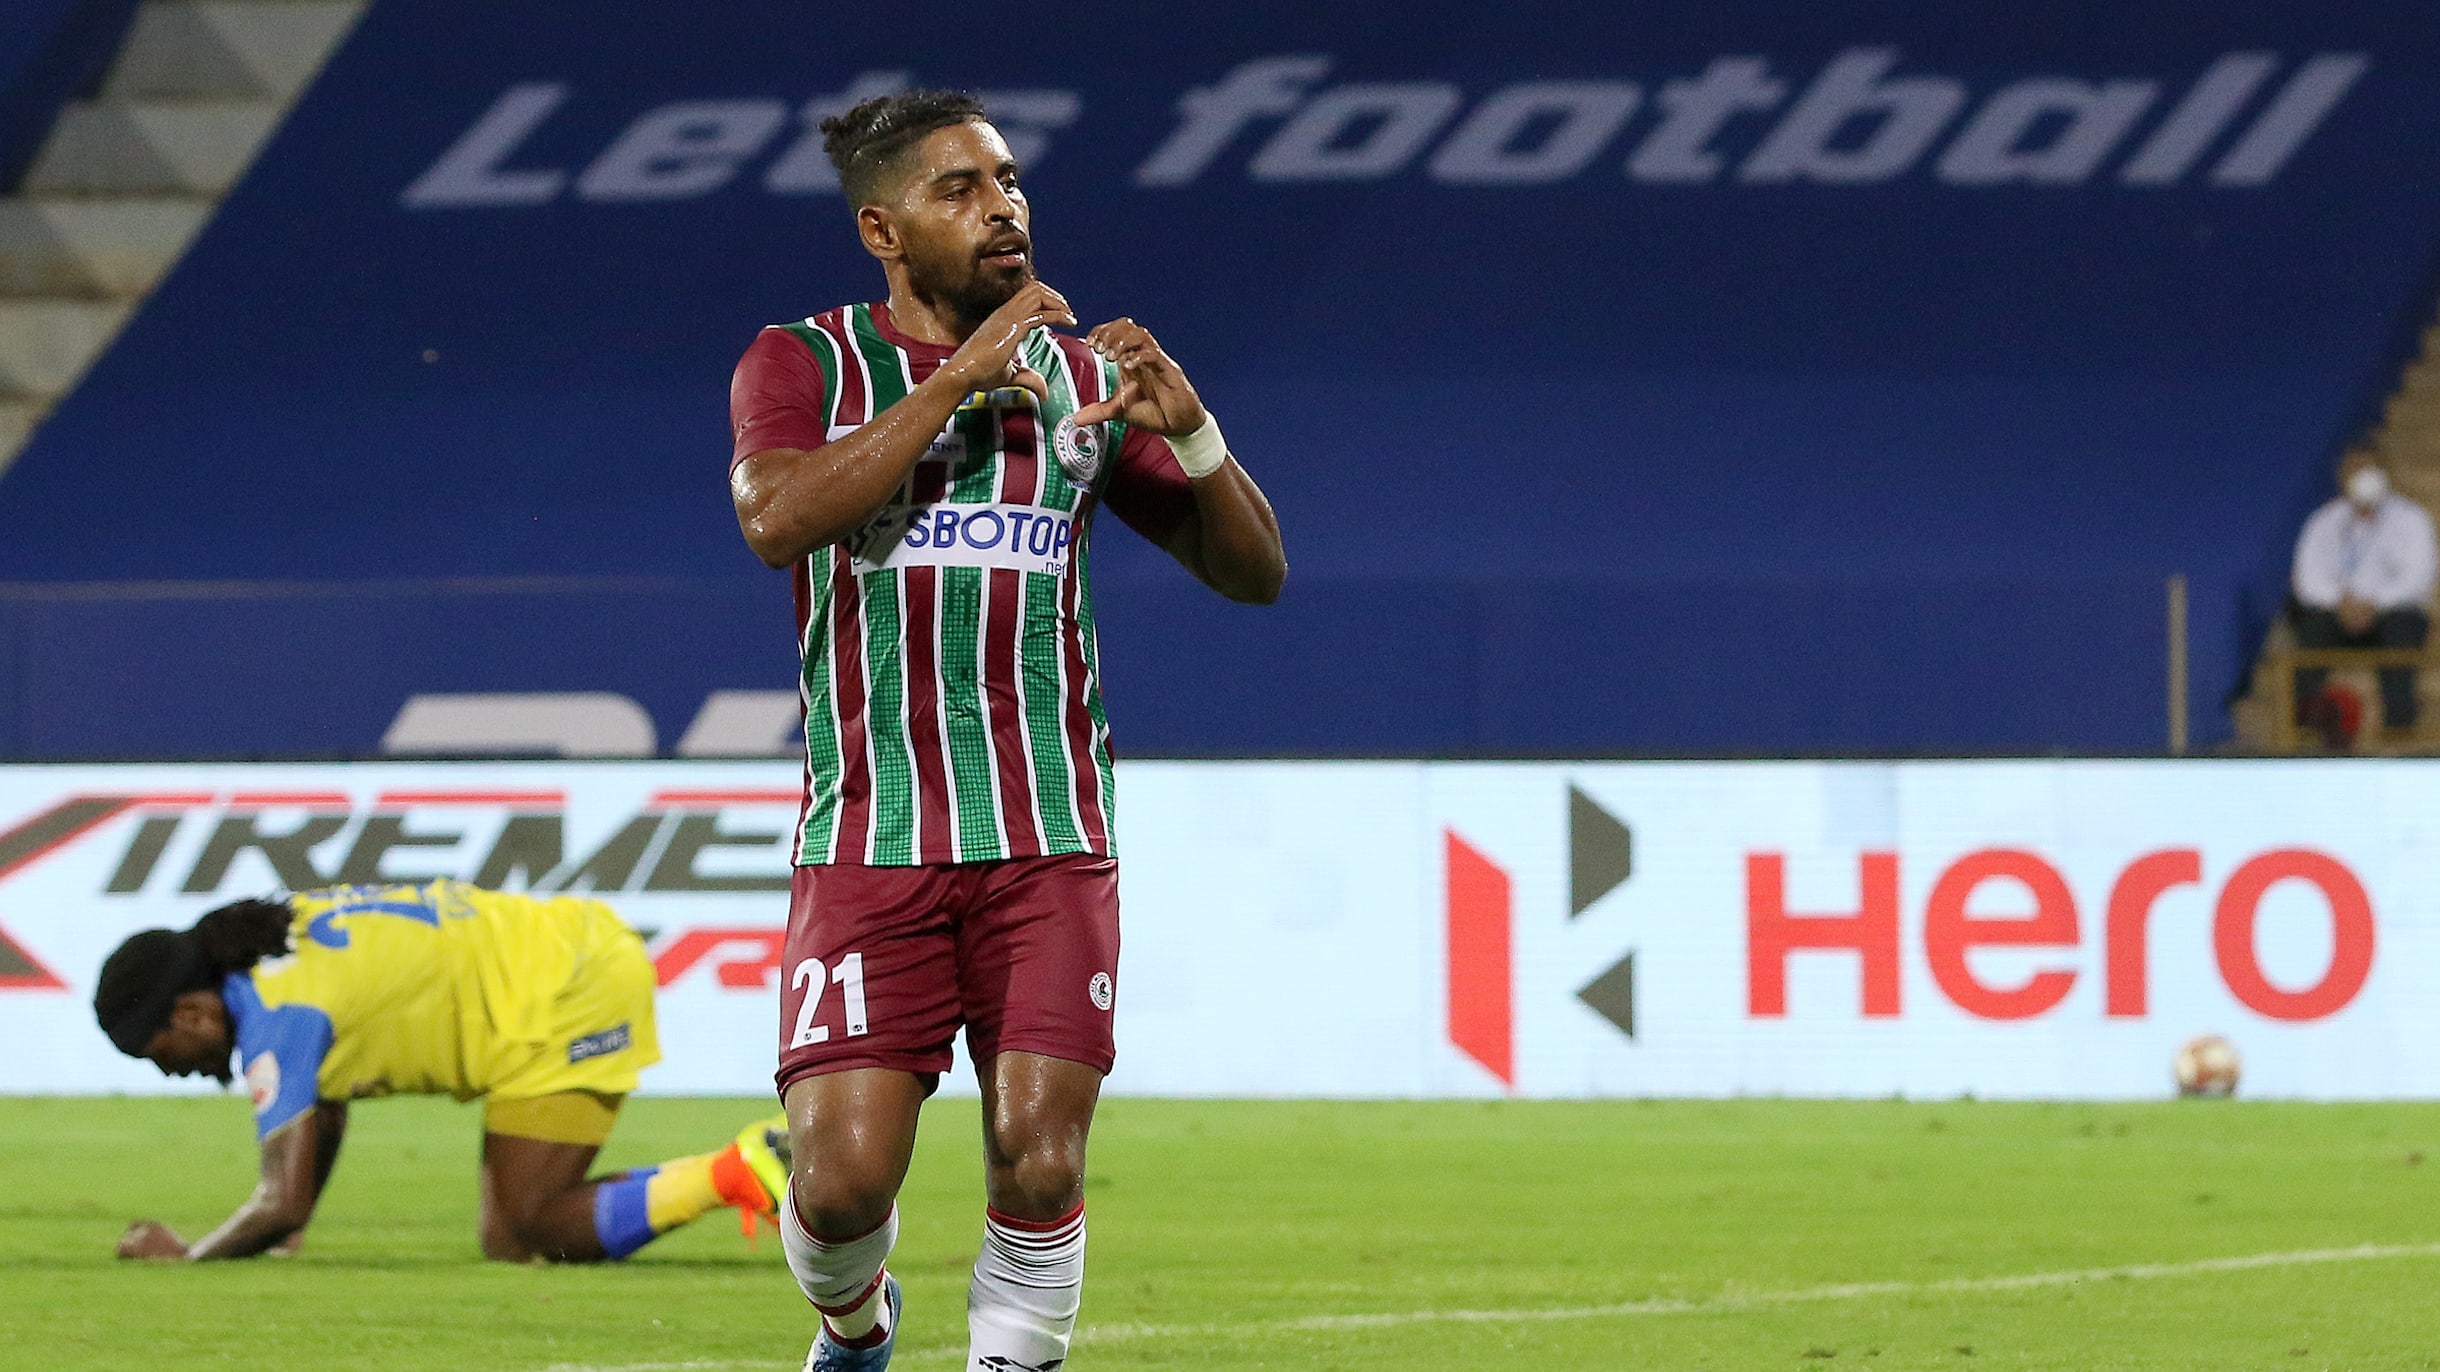 ATK Mohun Bagan vs Maziya in AFC Cup, watch live streaming and on TV in India